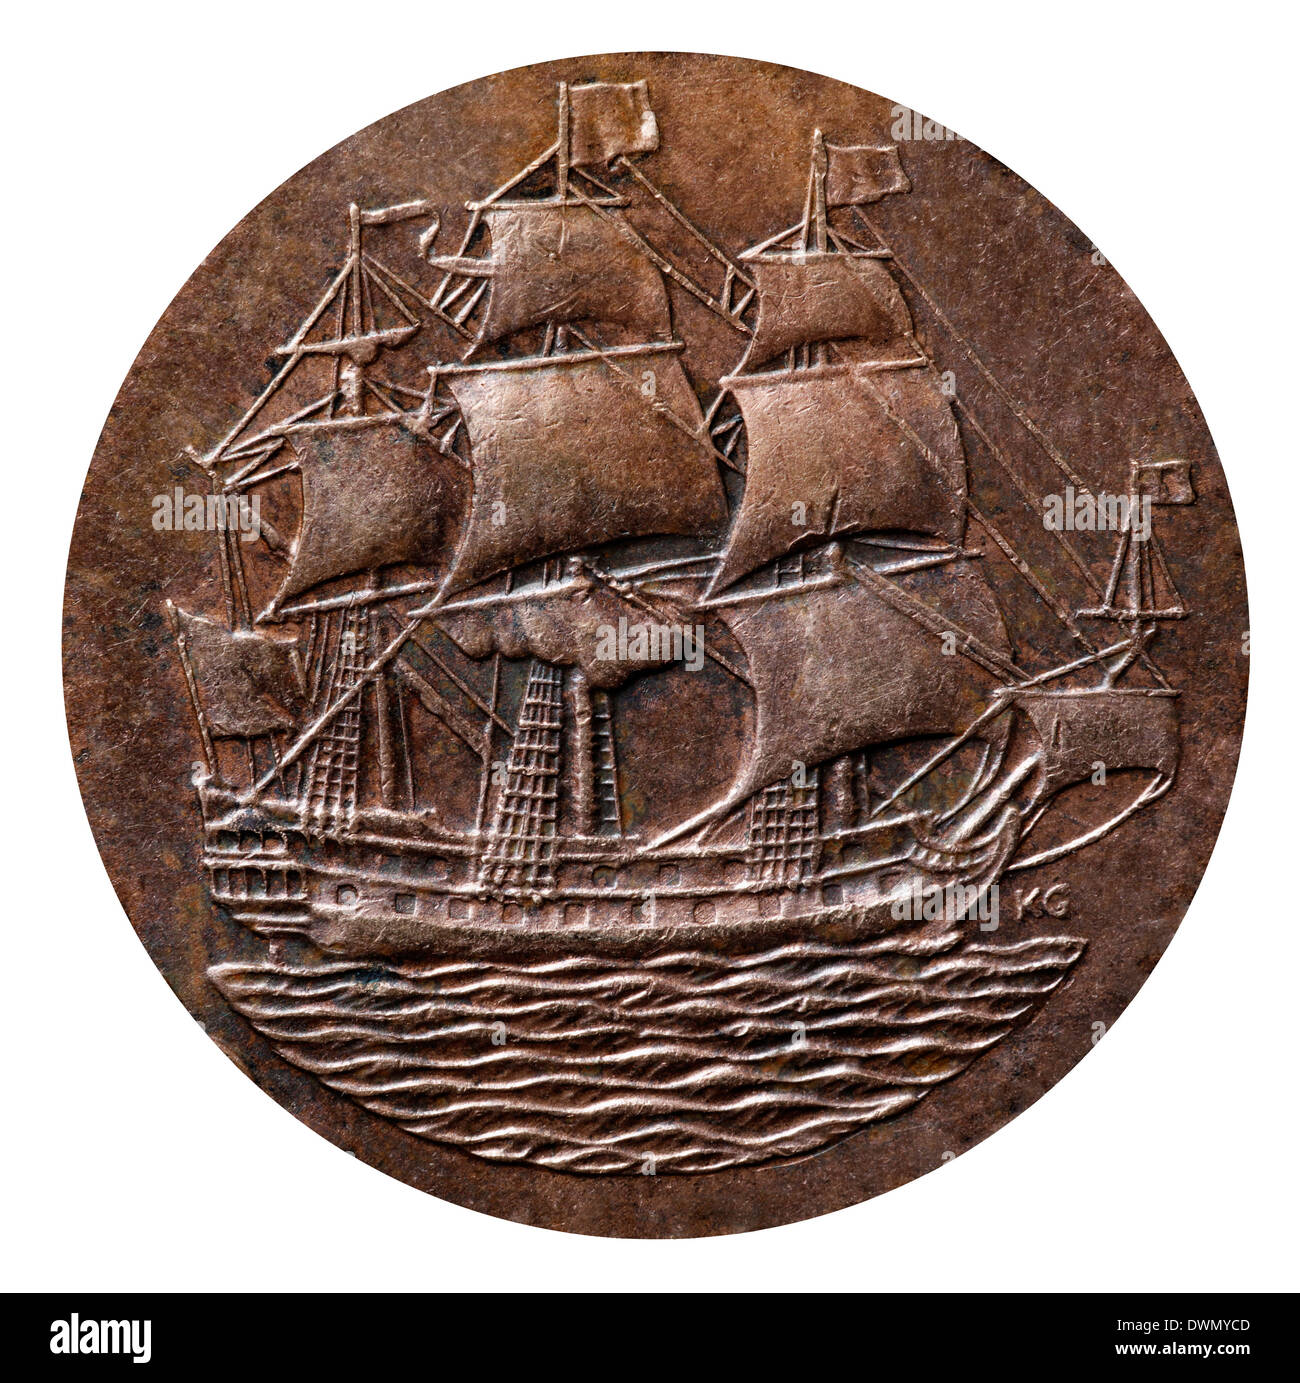 Sailing ship (Dromedaris), from 1 penny coin, South Africa, 1958, on white background Stock Photo